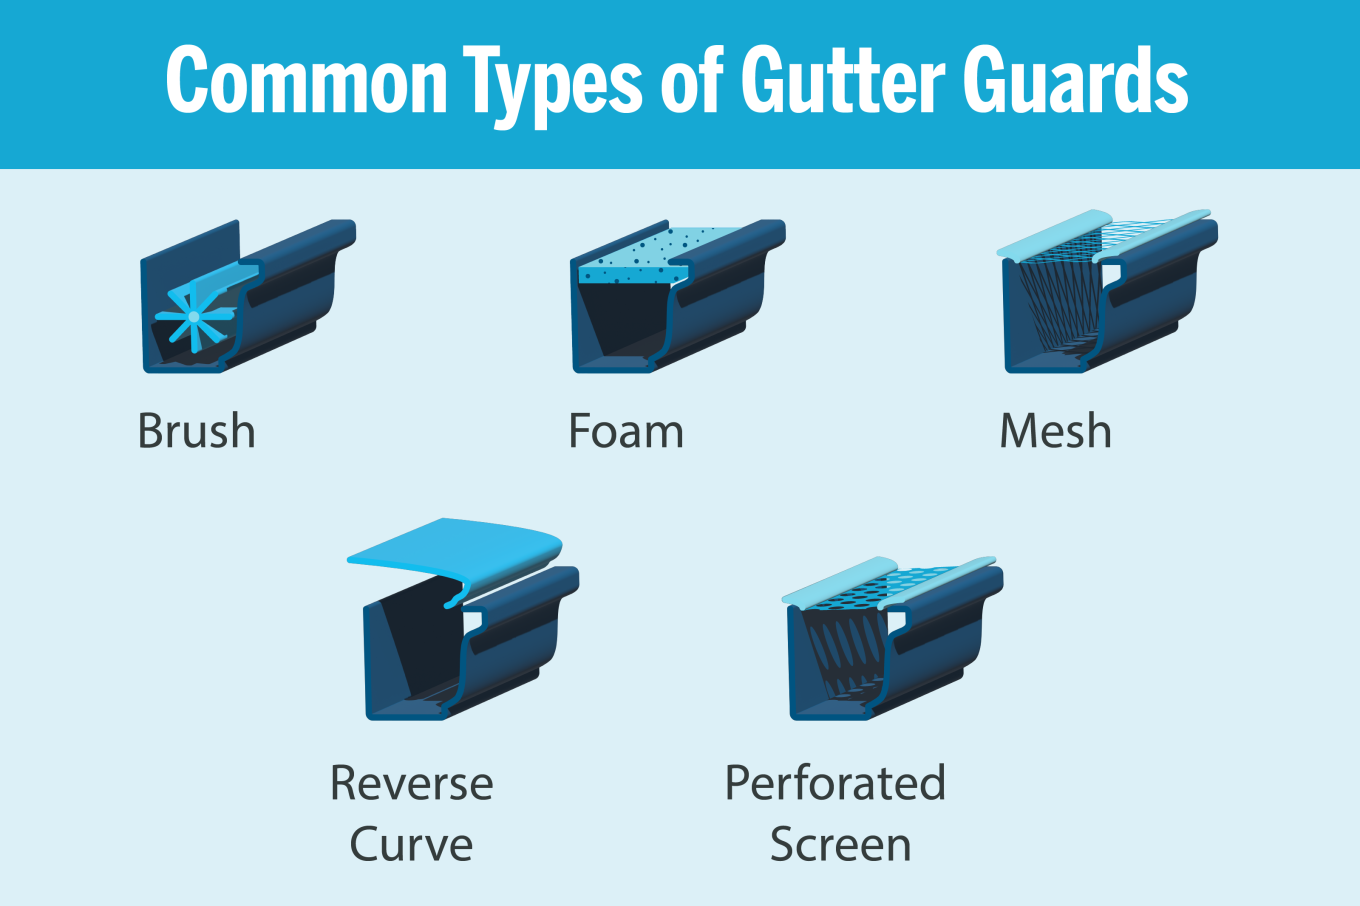 A graphic showing common types of gutter guards including brush, foam, mesh, reverse curve, and perforated screen.